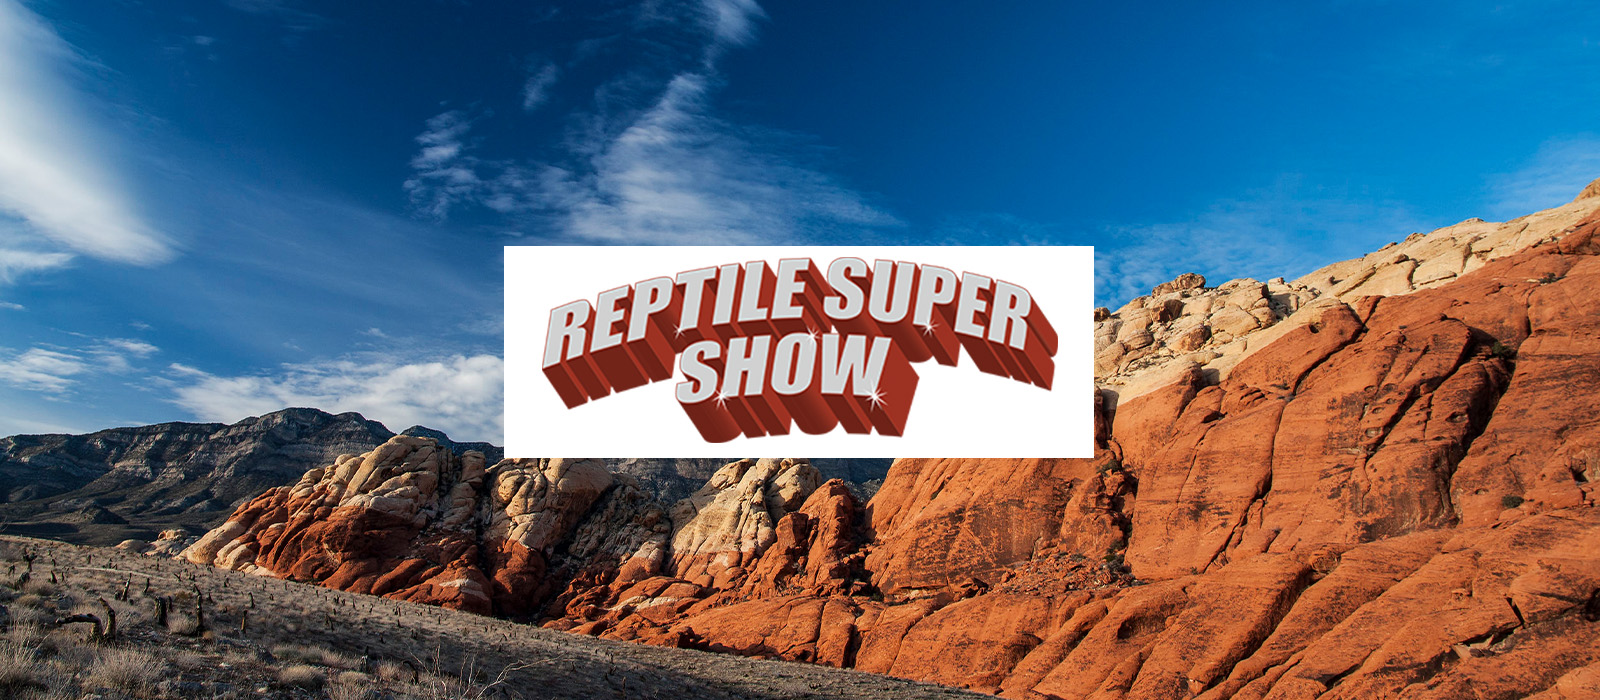 Reptile supershow banner